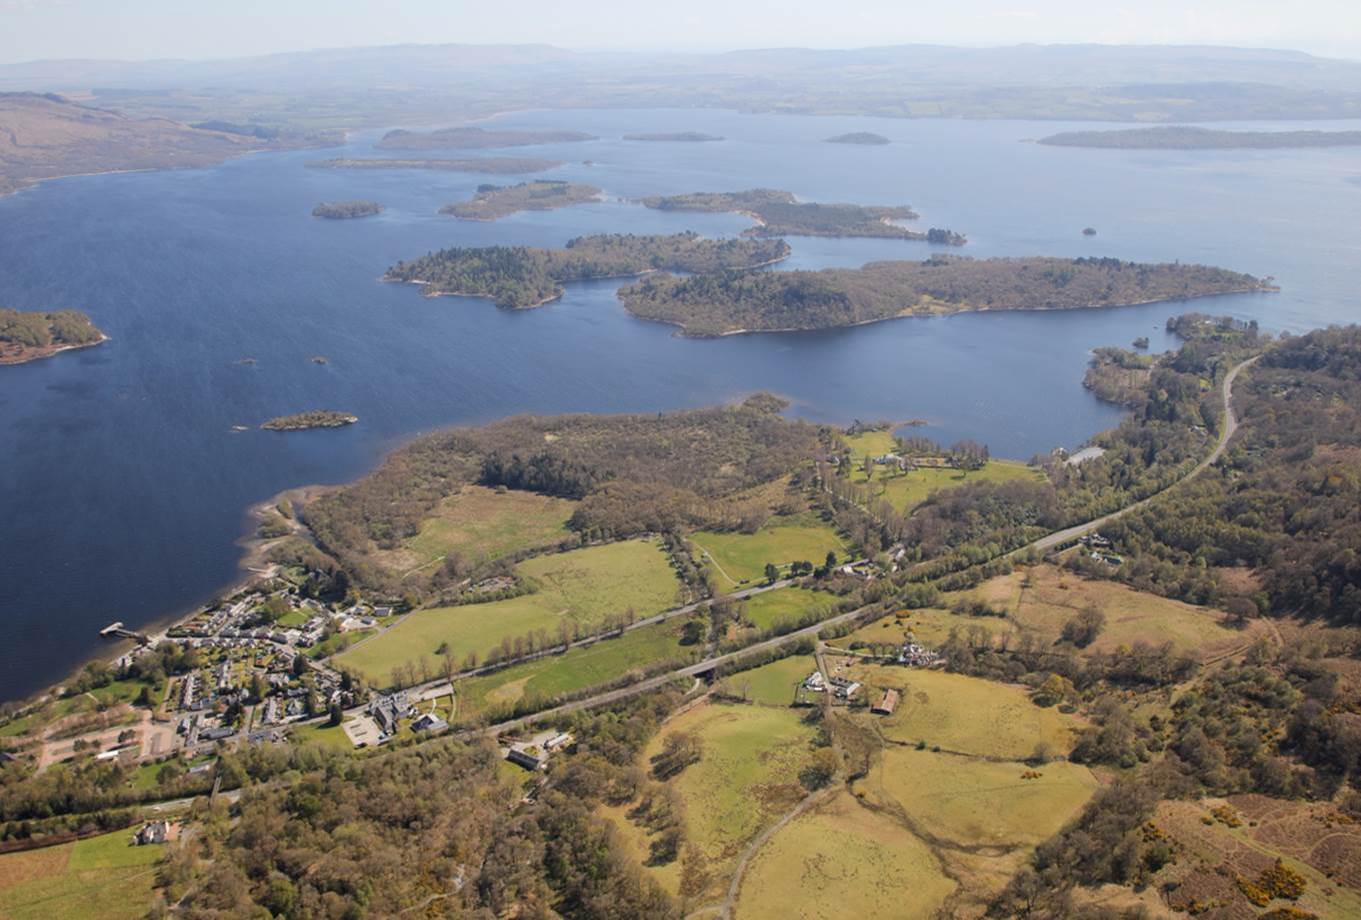 Affordable housing development opportunity in Loch Lomond and Trossachs National Park